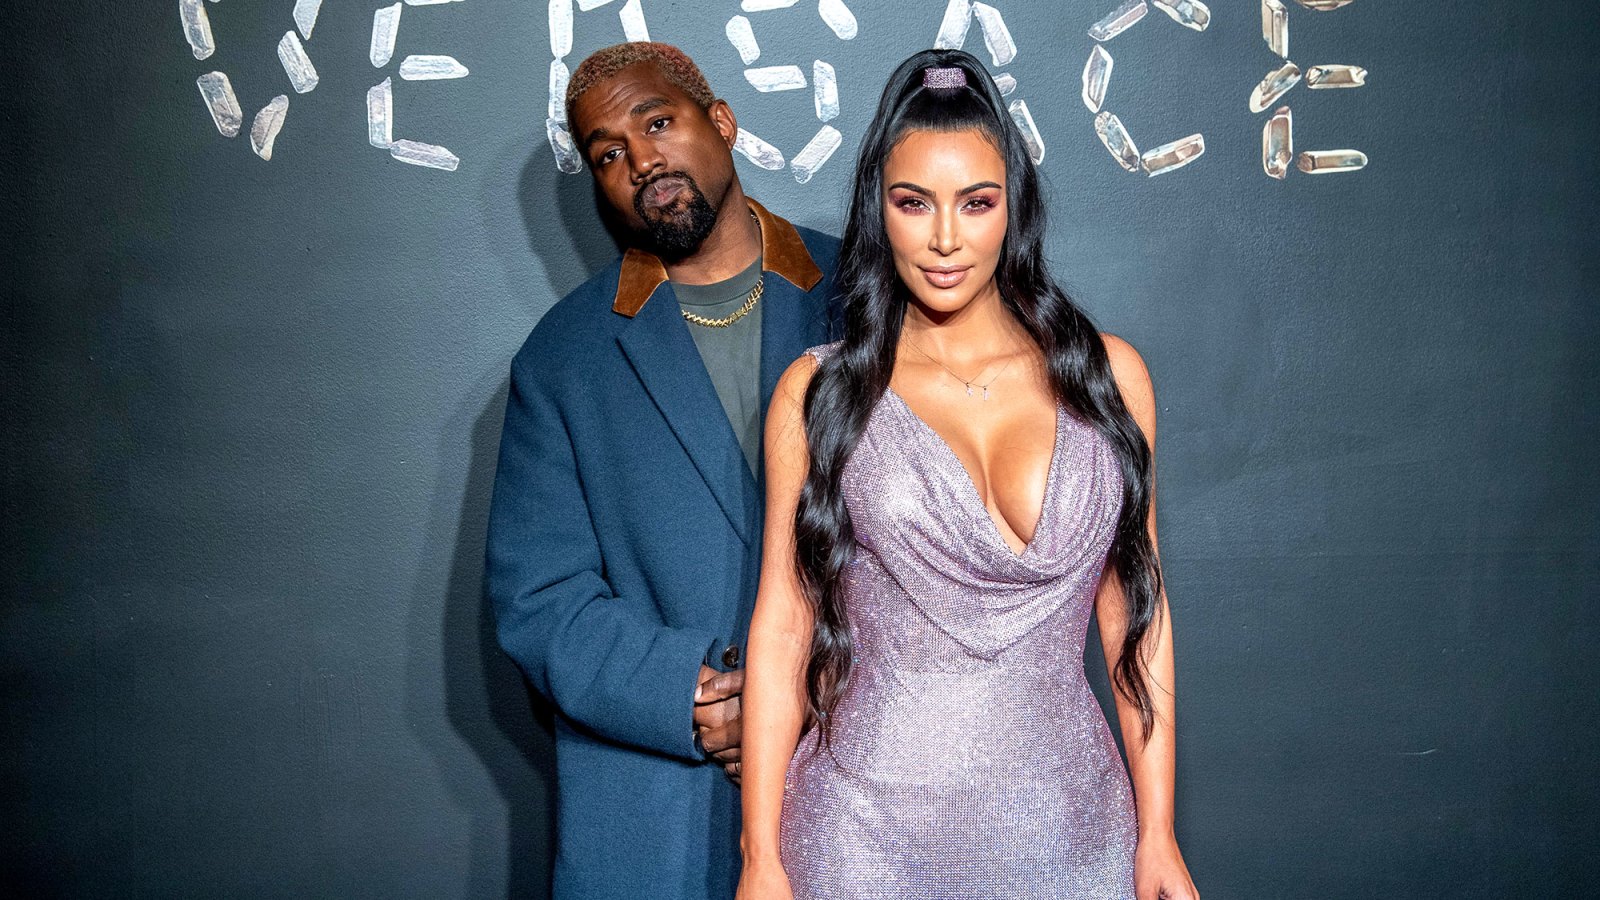 Kim Kardashian and Kanye West Are Working on Baby No. 4's Nursery, But Haven't Picked a Name